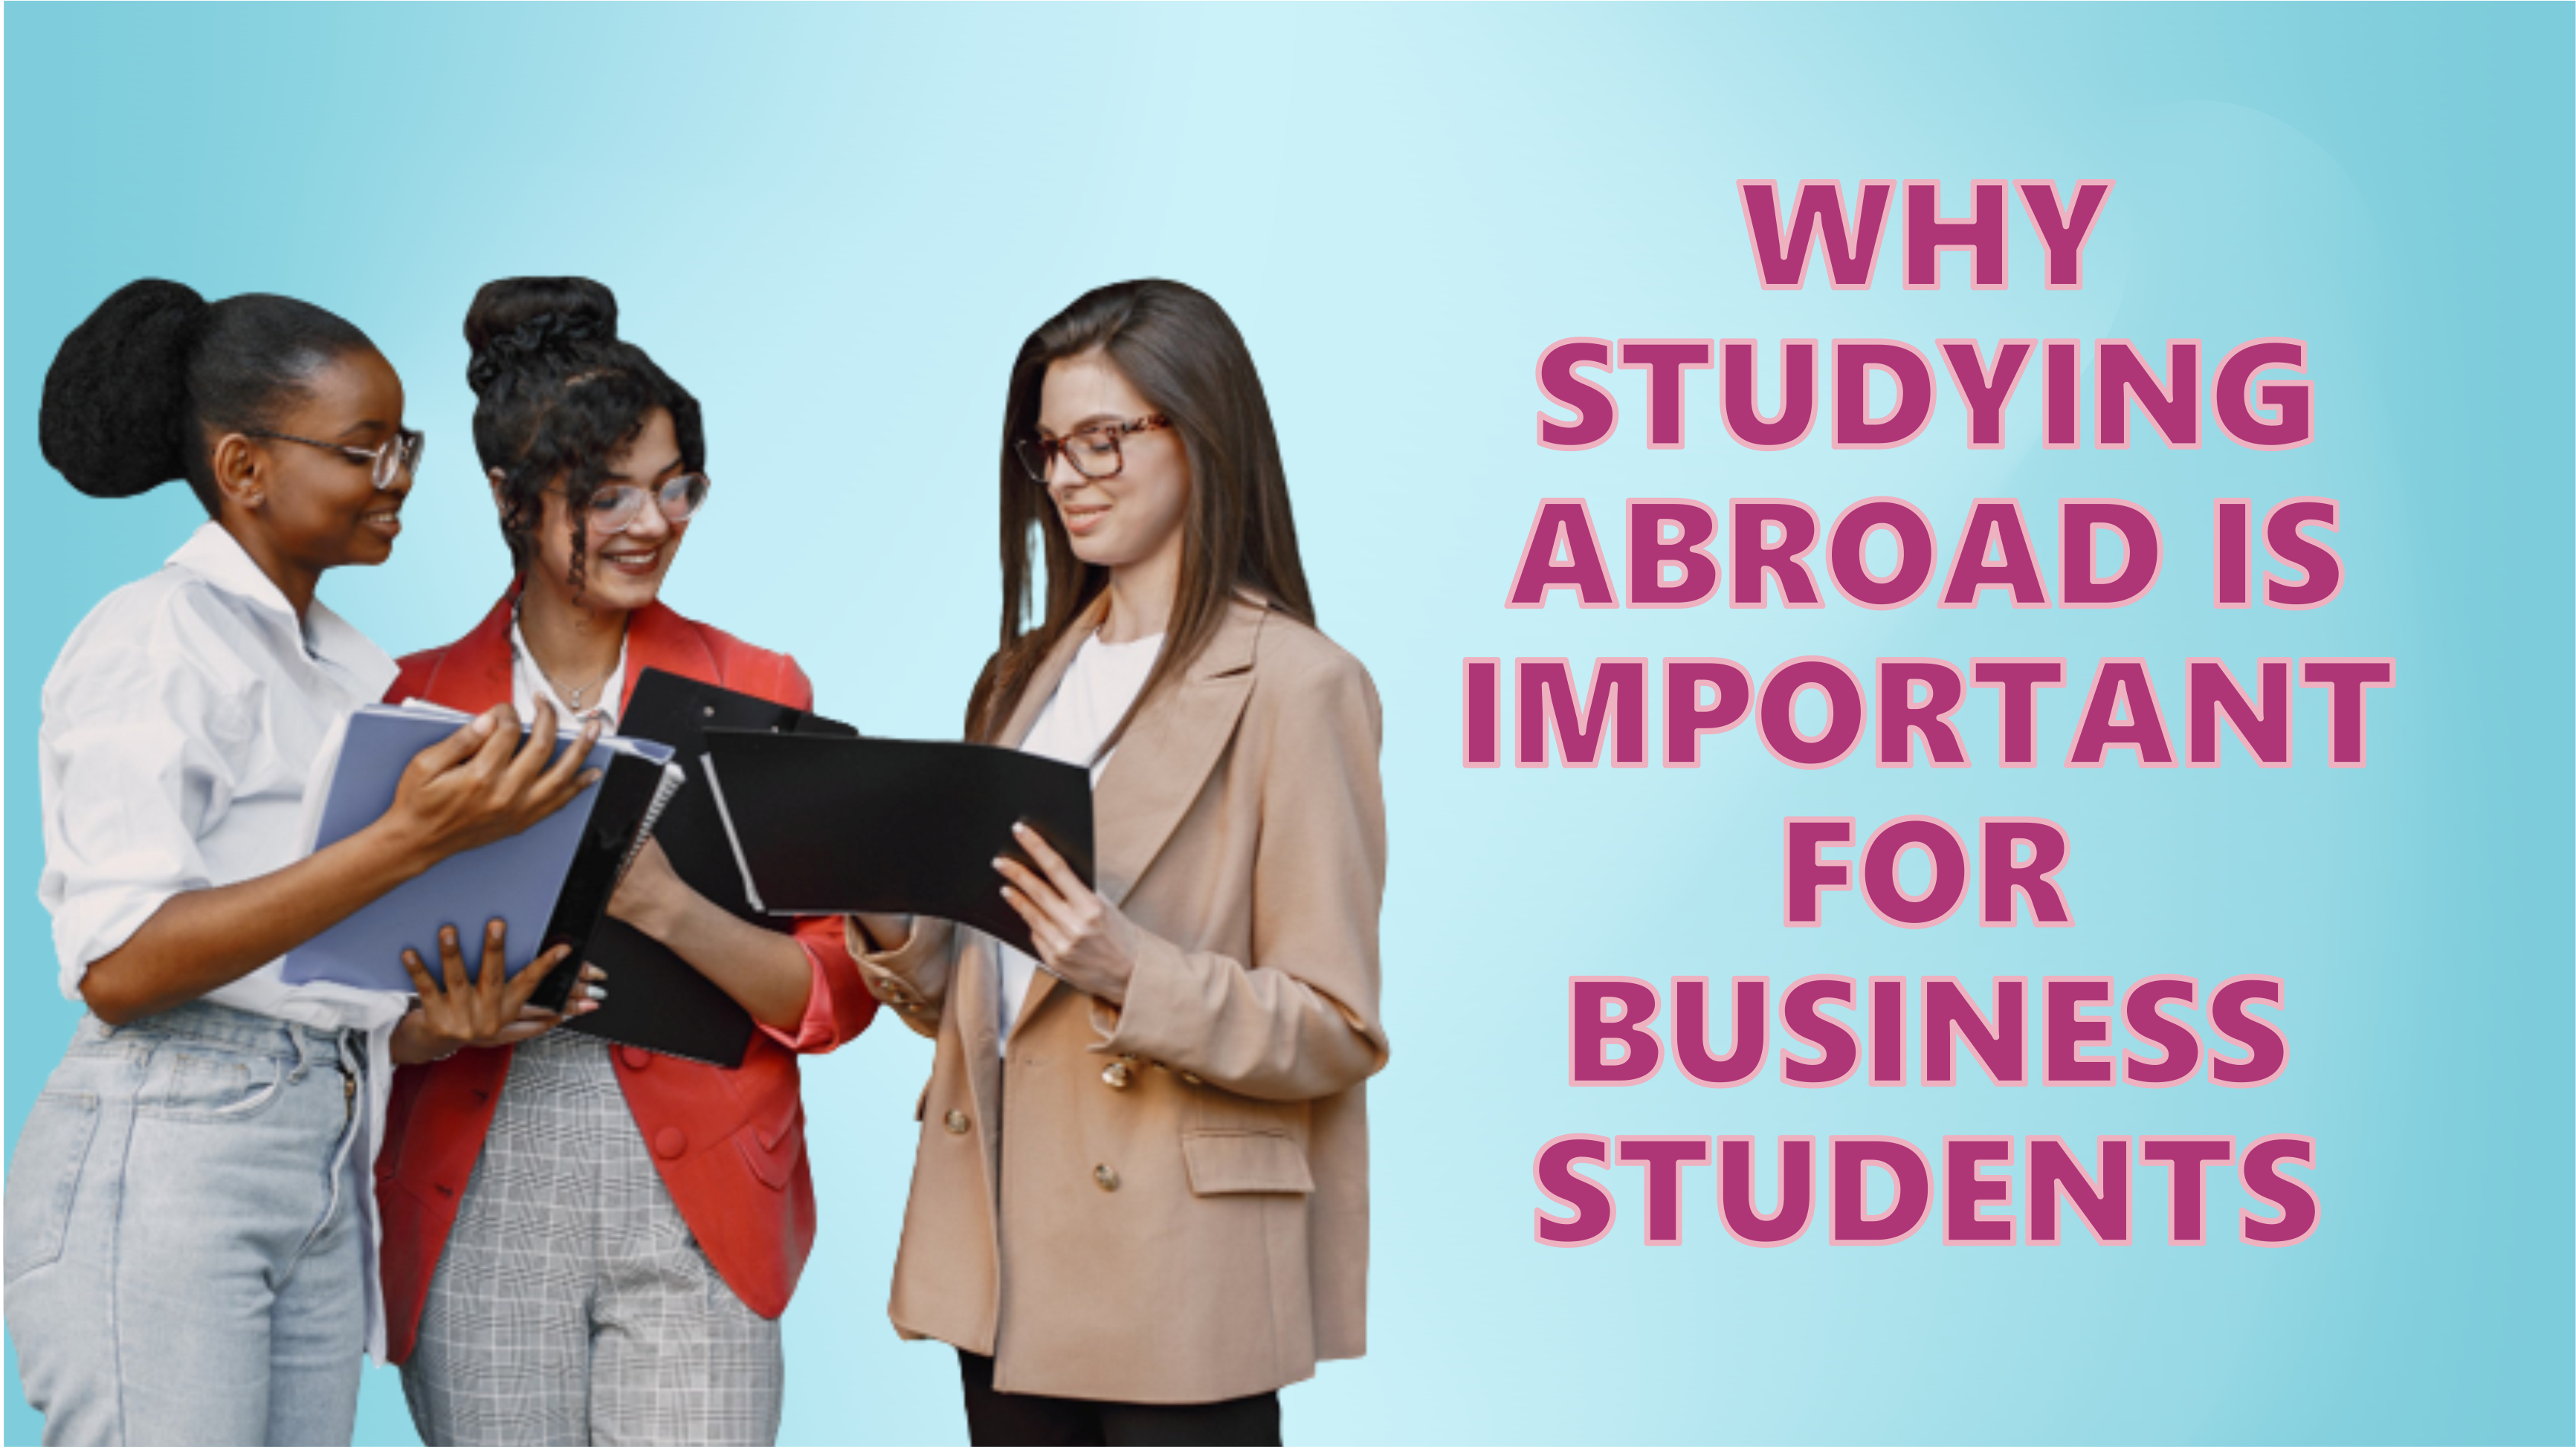 Why studying abroad is important for business students